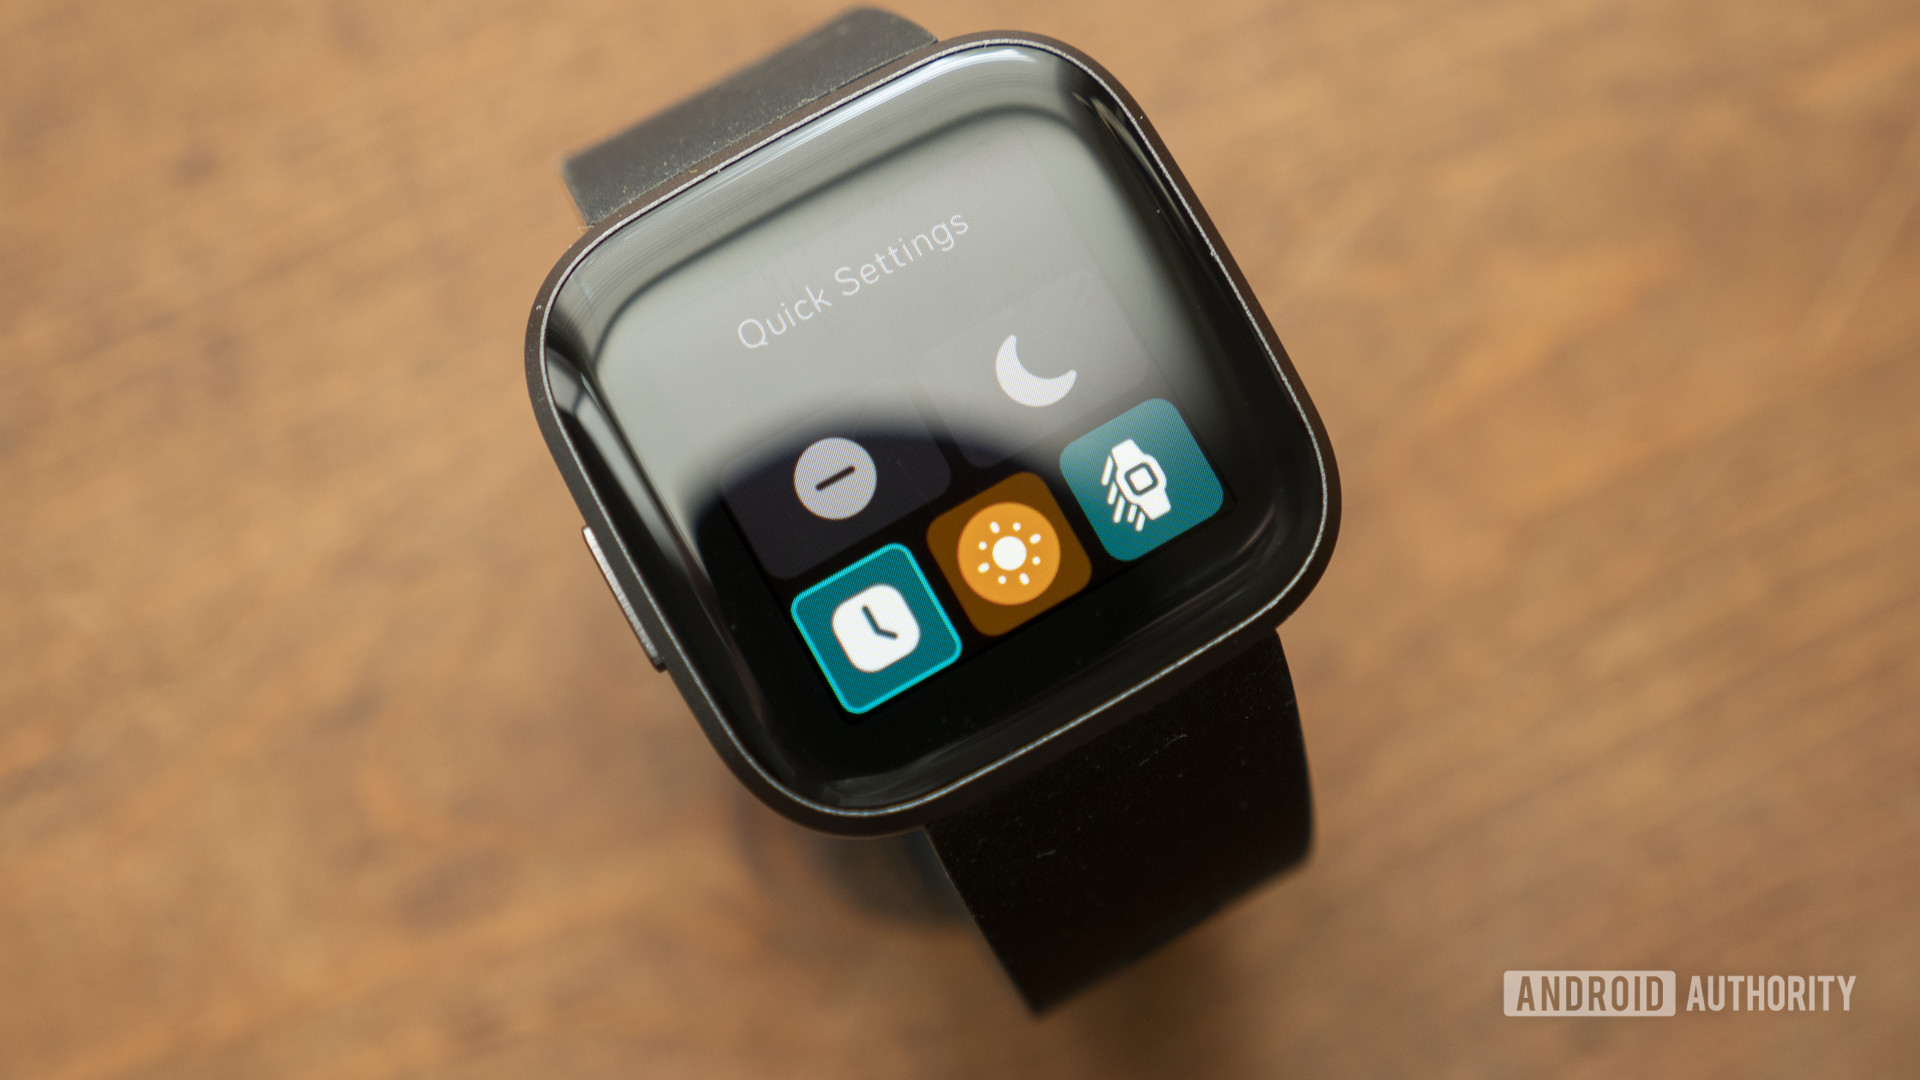 how to change quick settings on fitbit versa 2